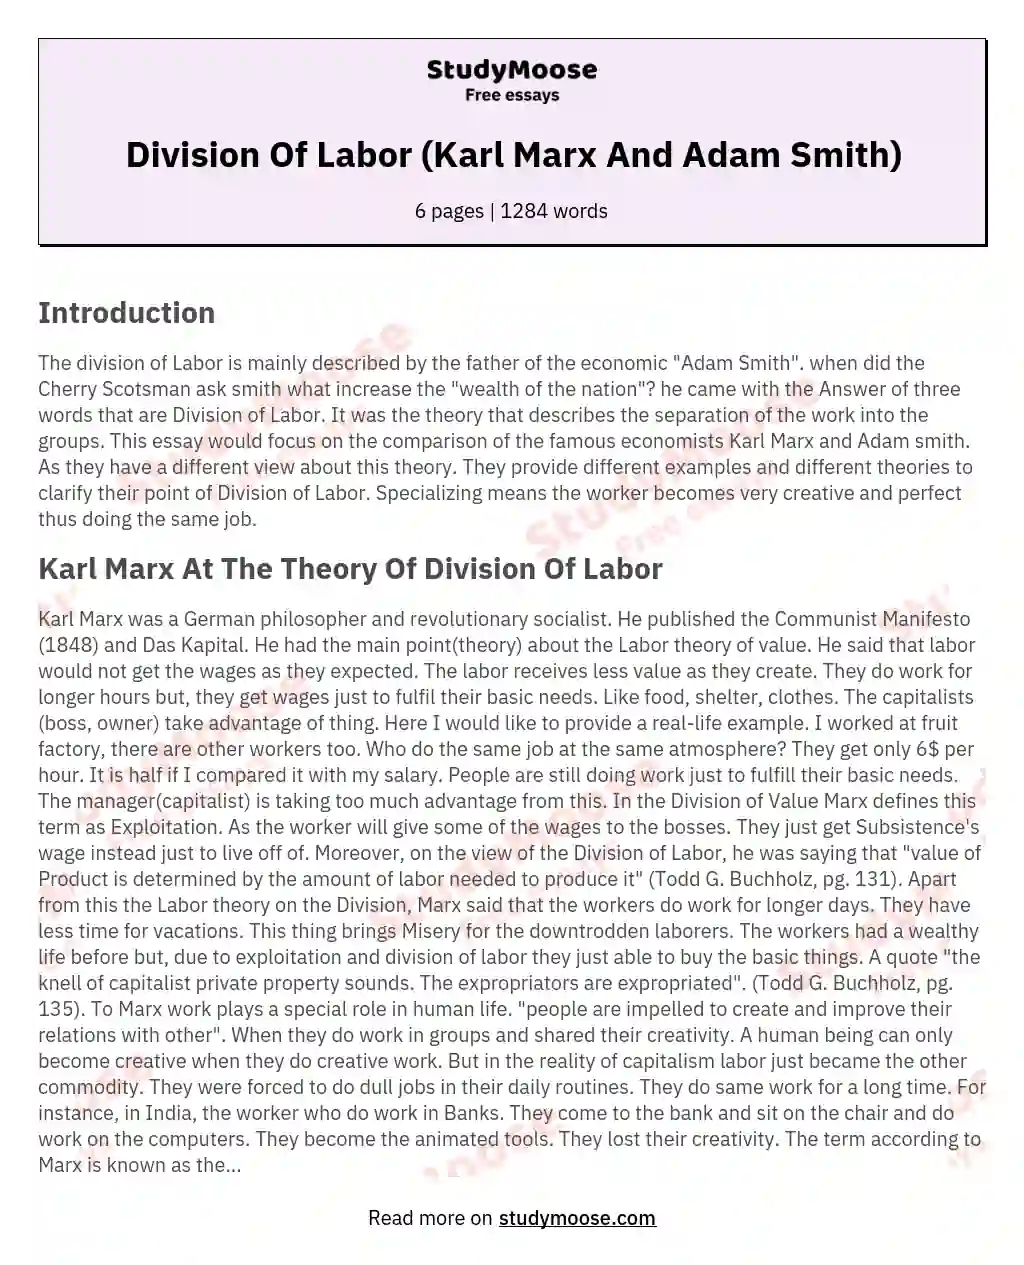 Division Of Labor (Karl Marx And Adam Smith) essay